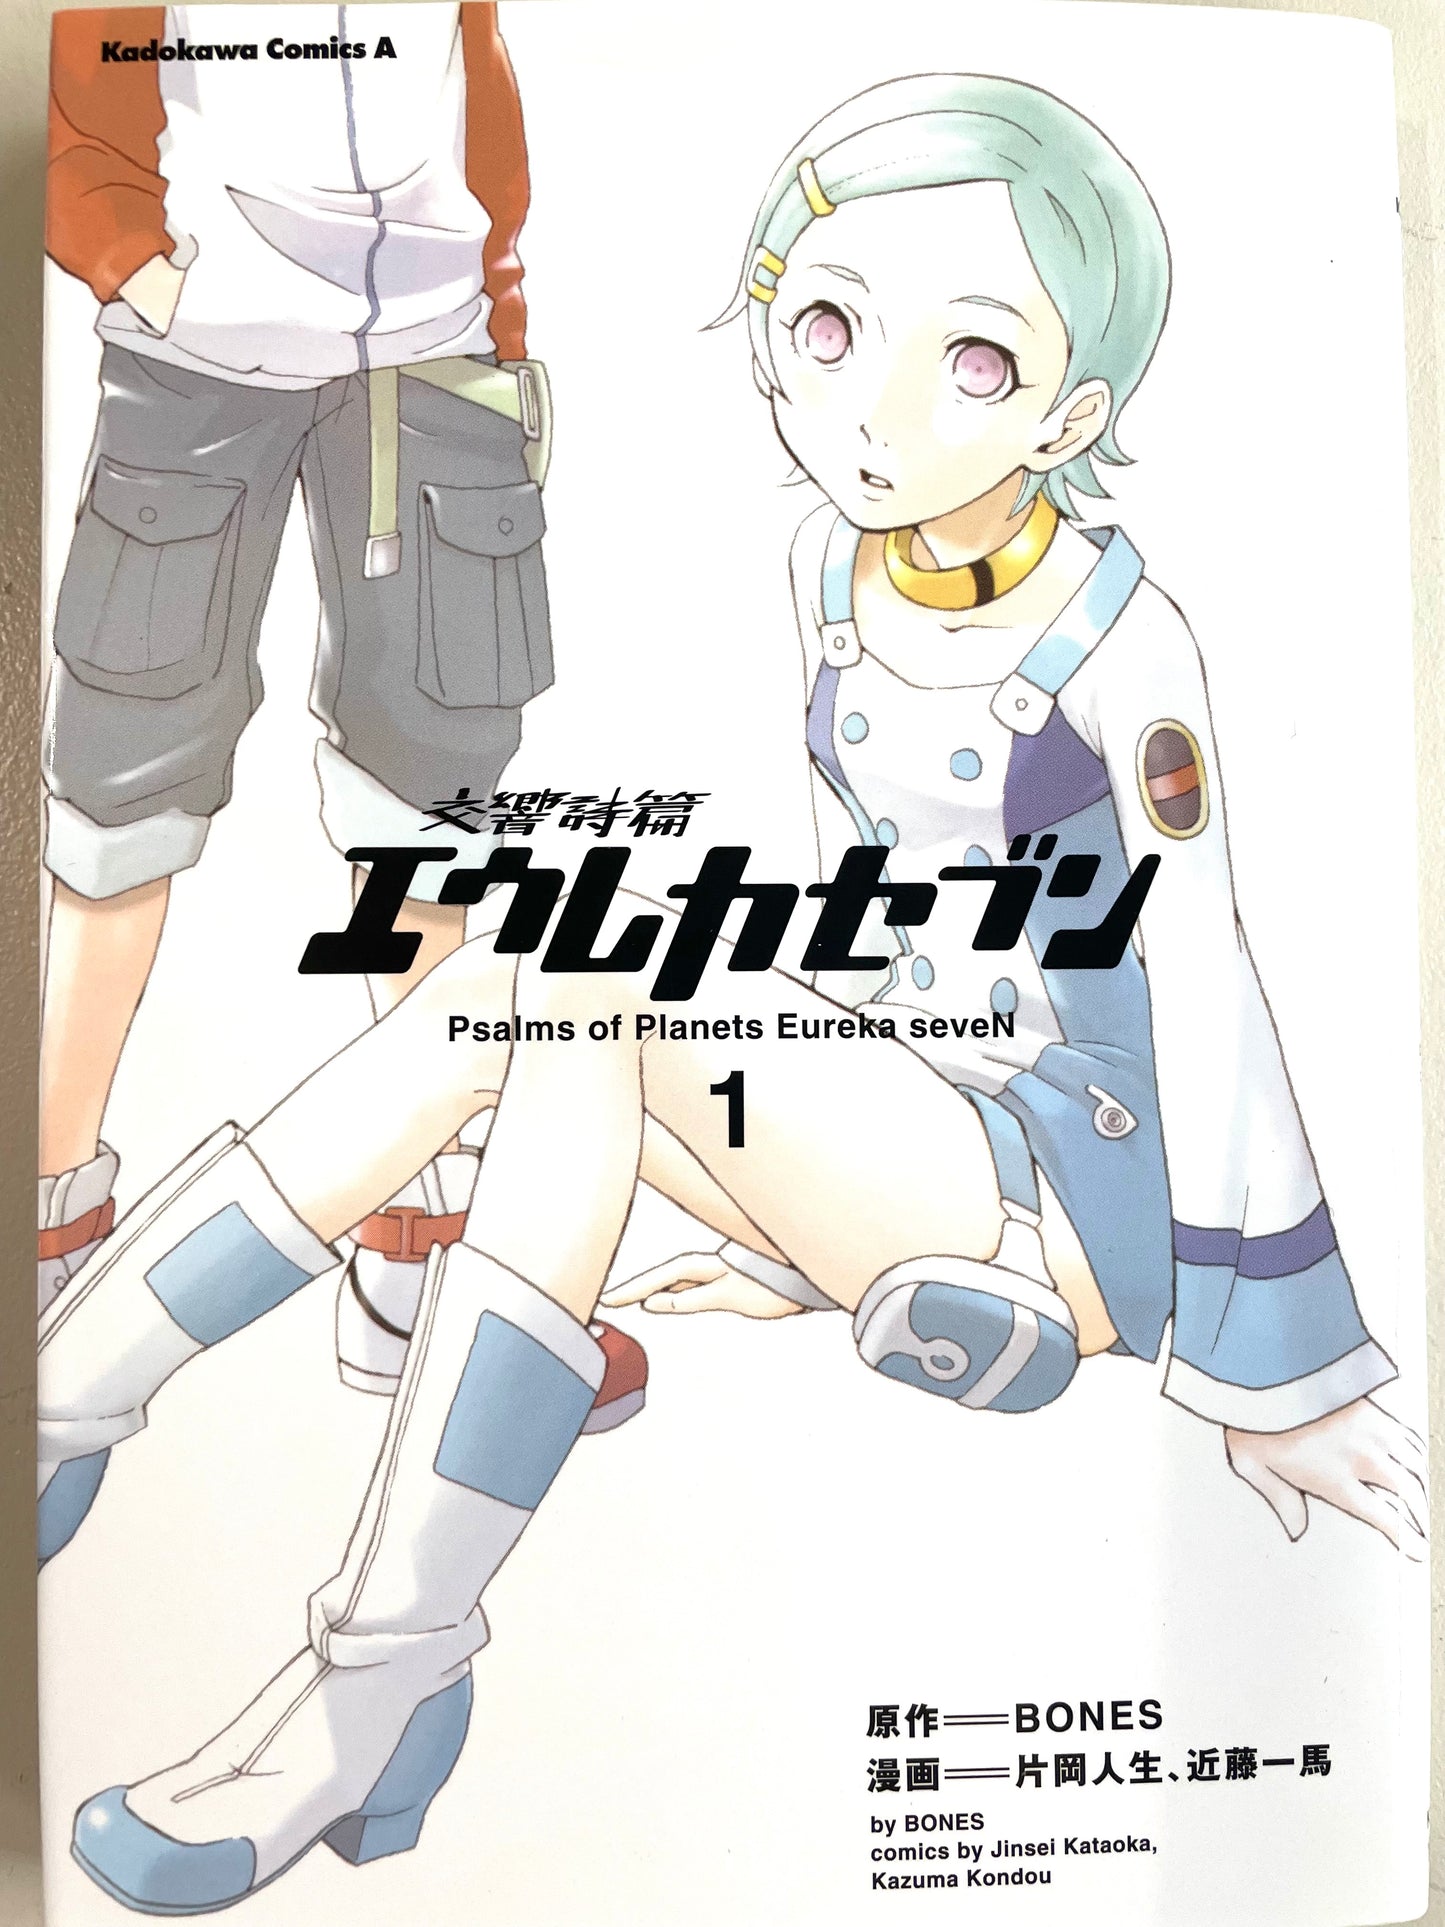 Psalms of Planets Eureka seveN Vol.1-Official Japanese Edition